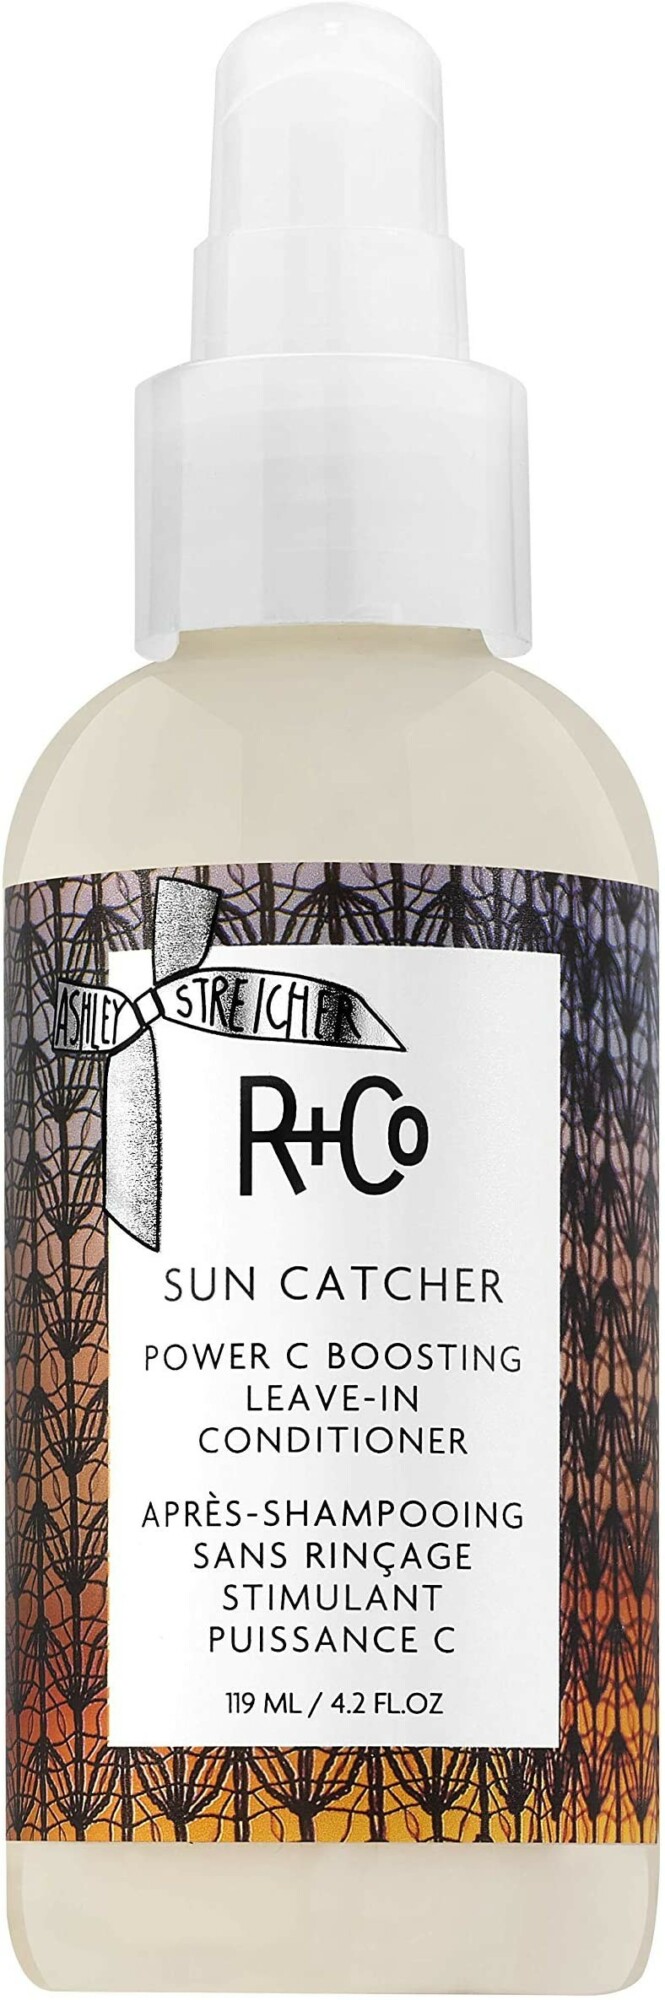 Click for more info about R+Co Sun Catcher Power C Boosting Leave-In Conditioner